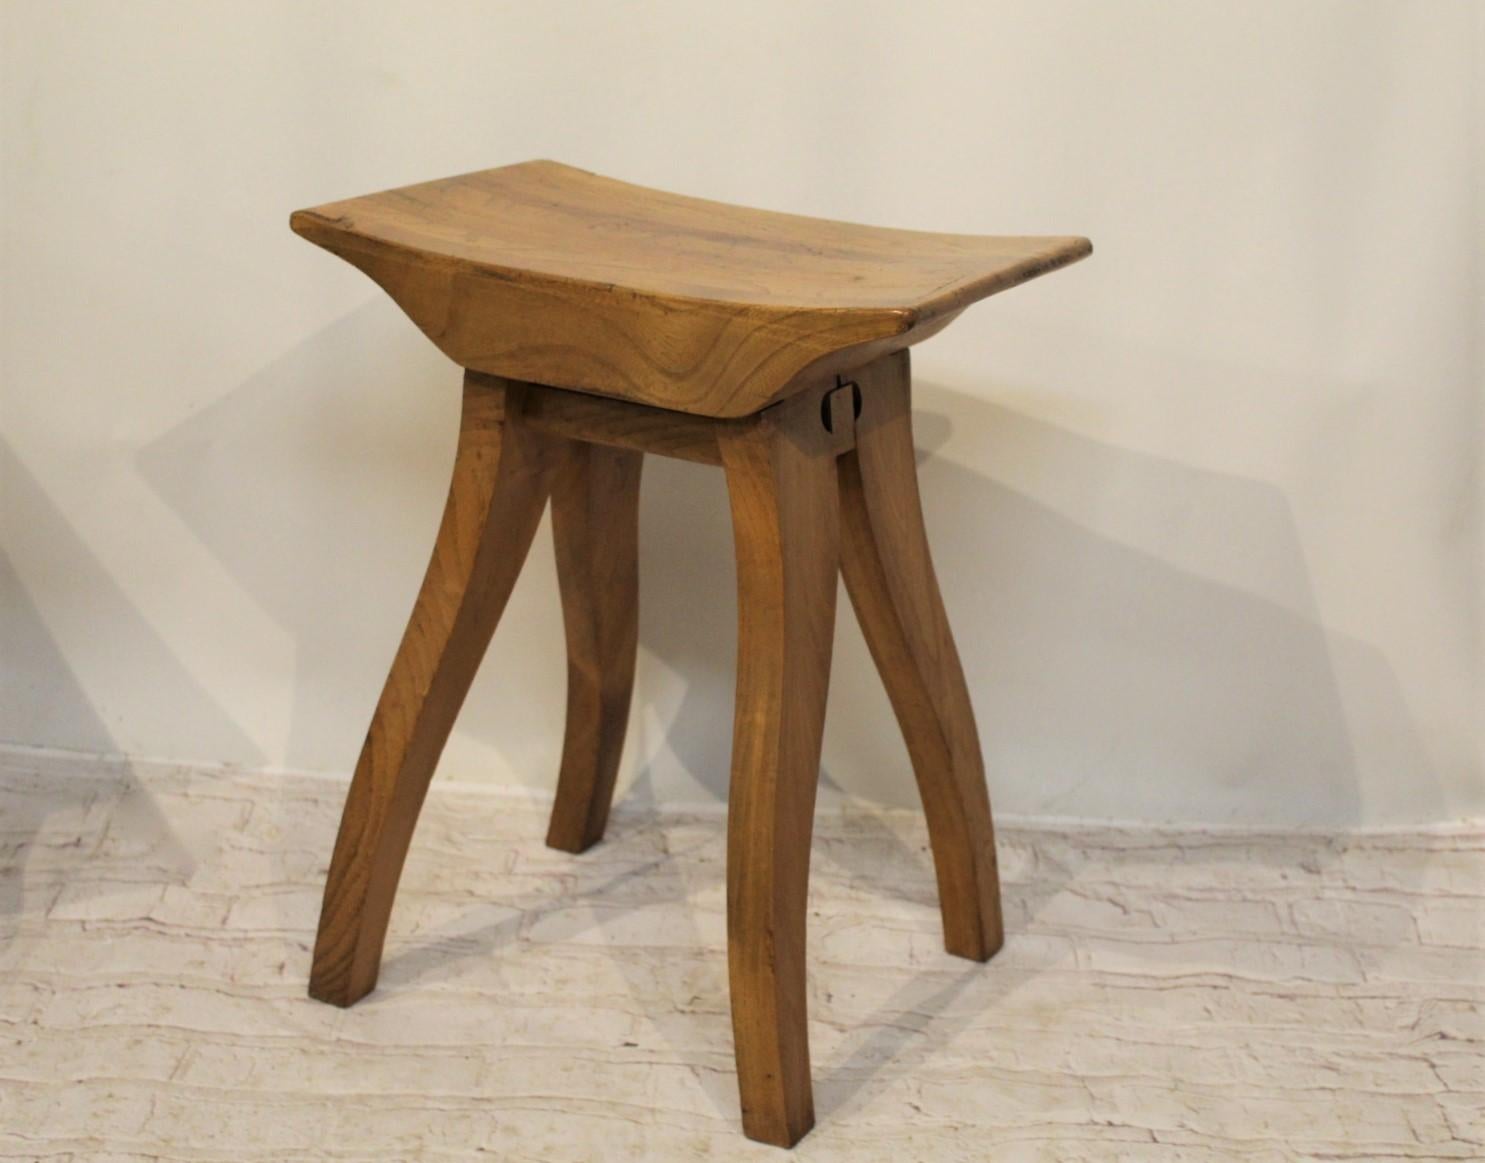 English Pair of Arts & Crafts Style Wooden Stools